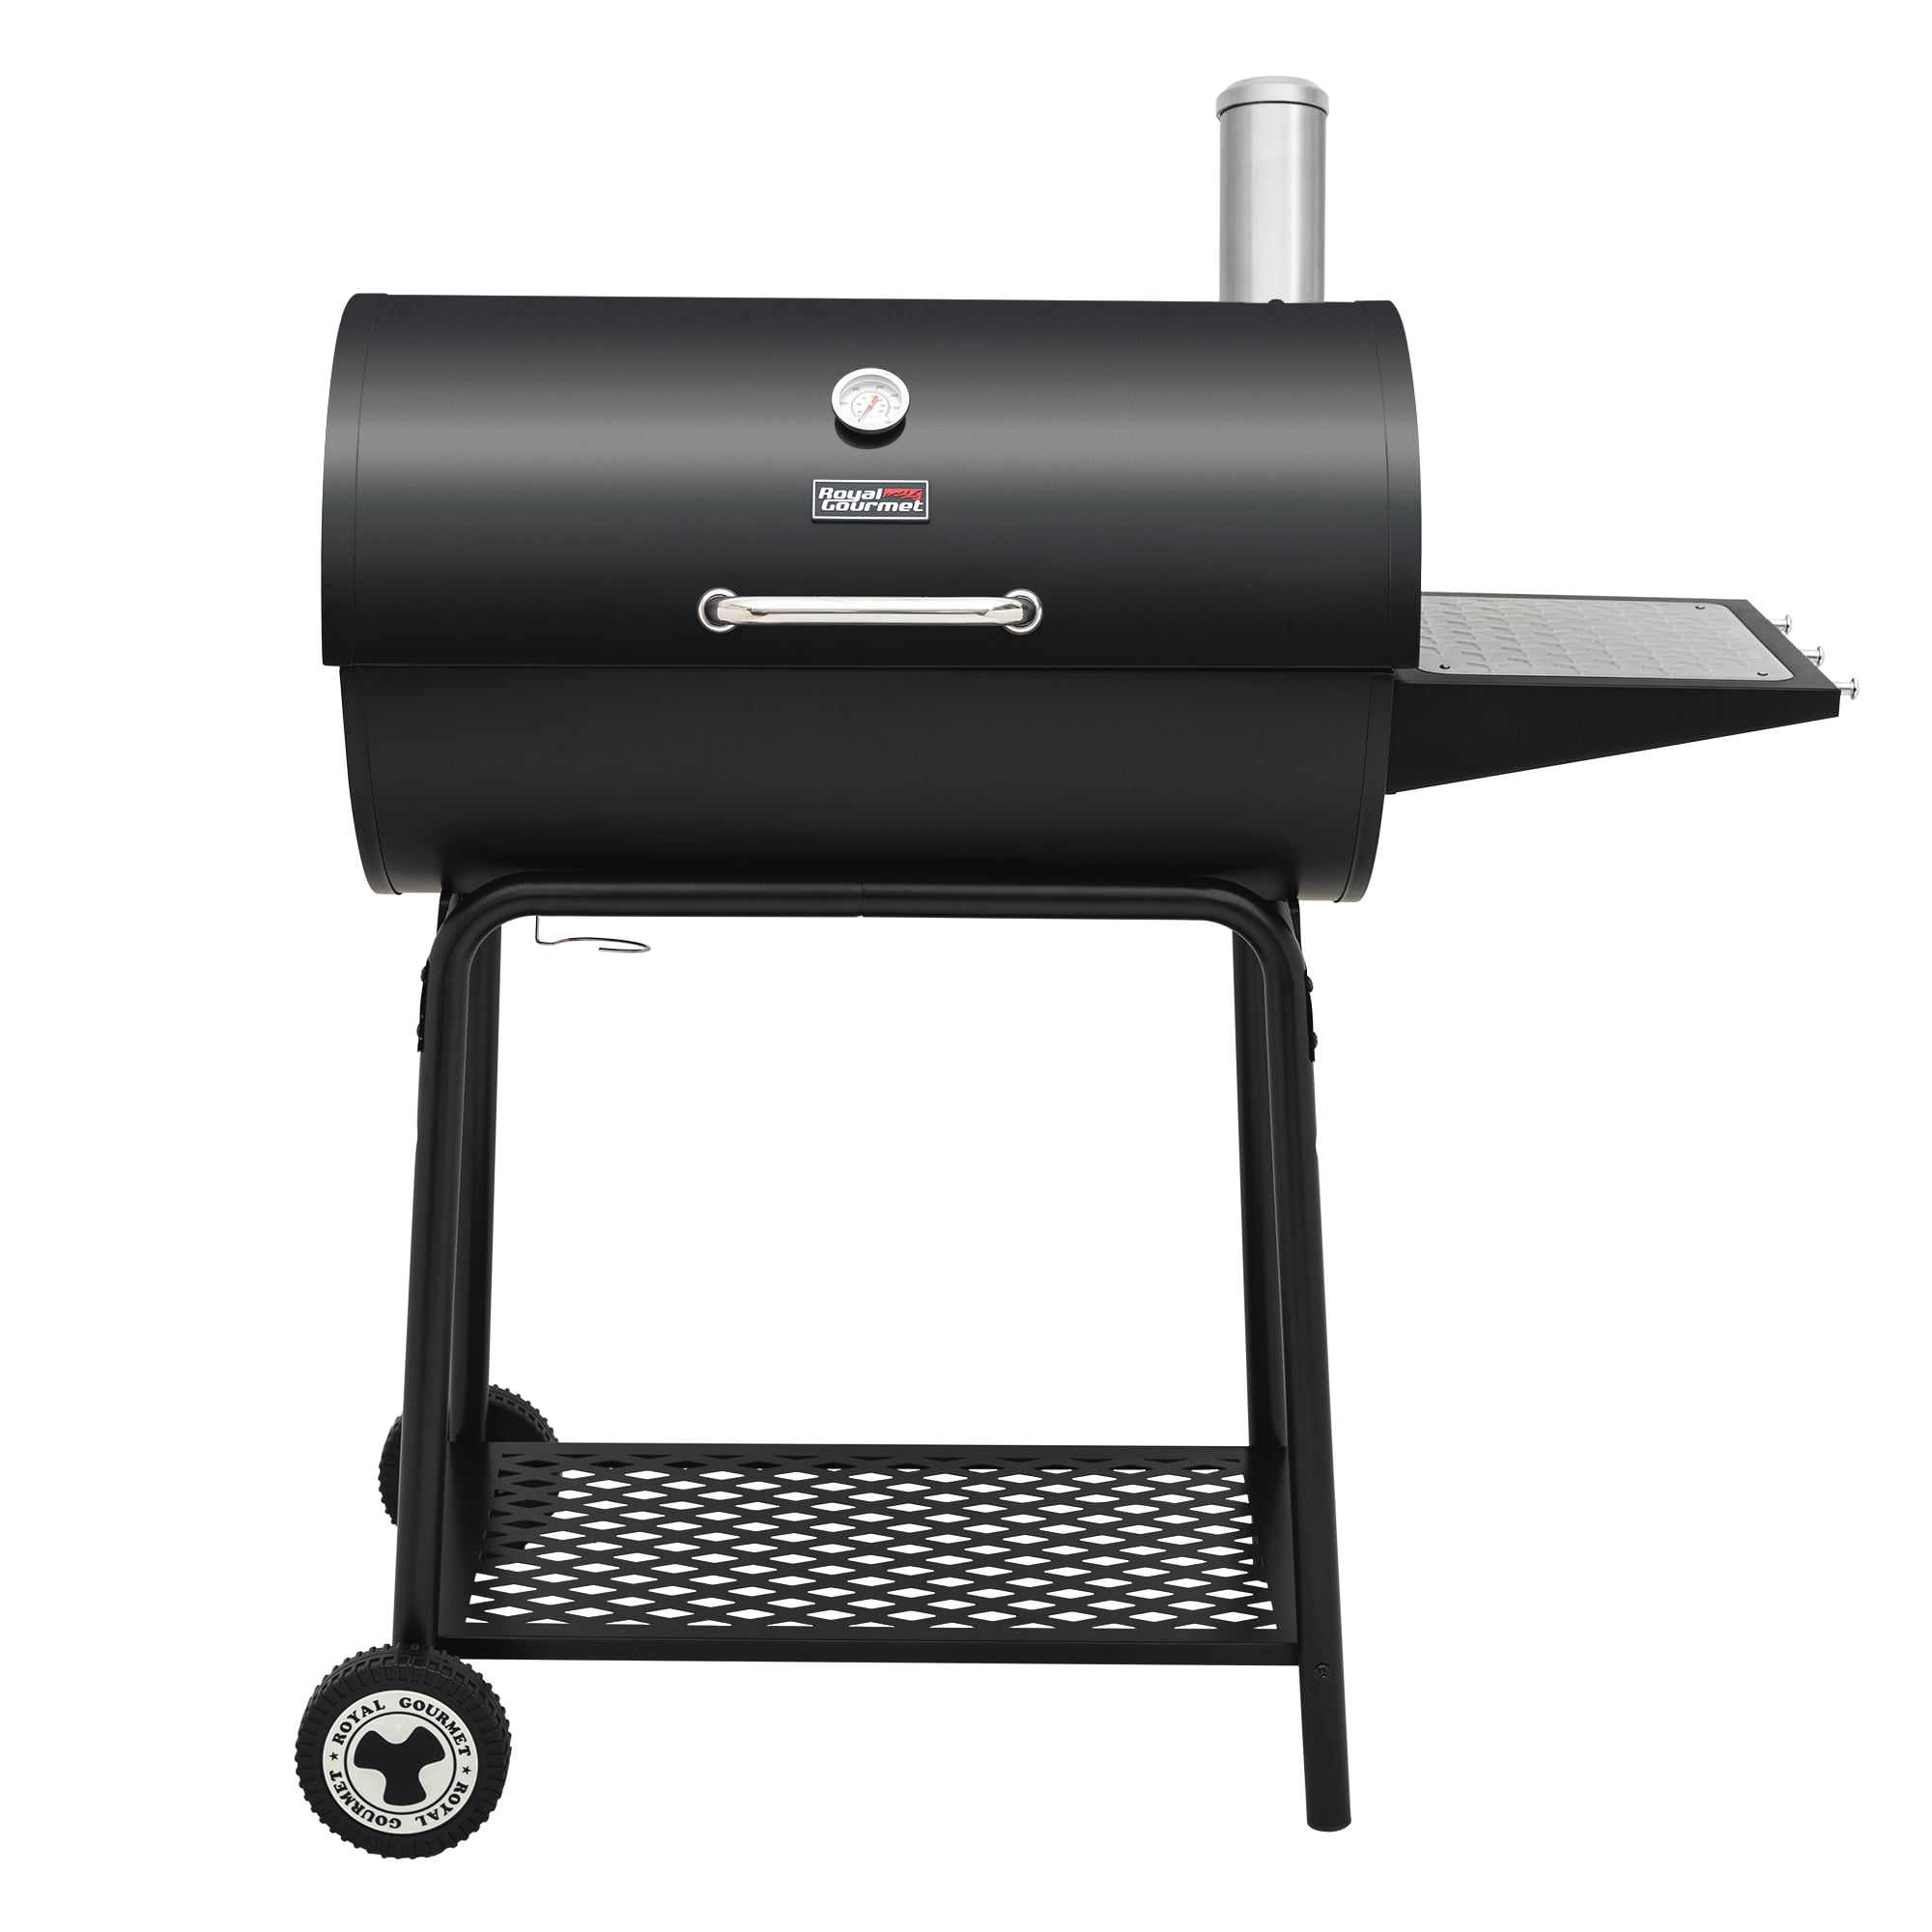 Royal Gourmet 30″ CC1830 627 Square inches Barrel Charcoal Grill with Side Table